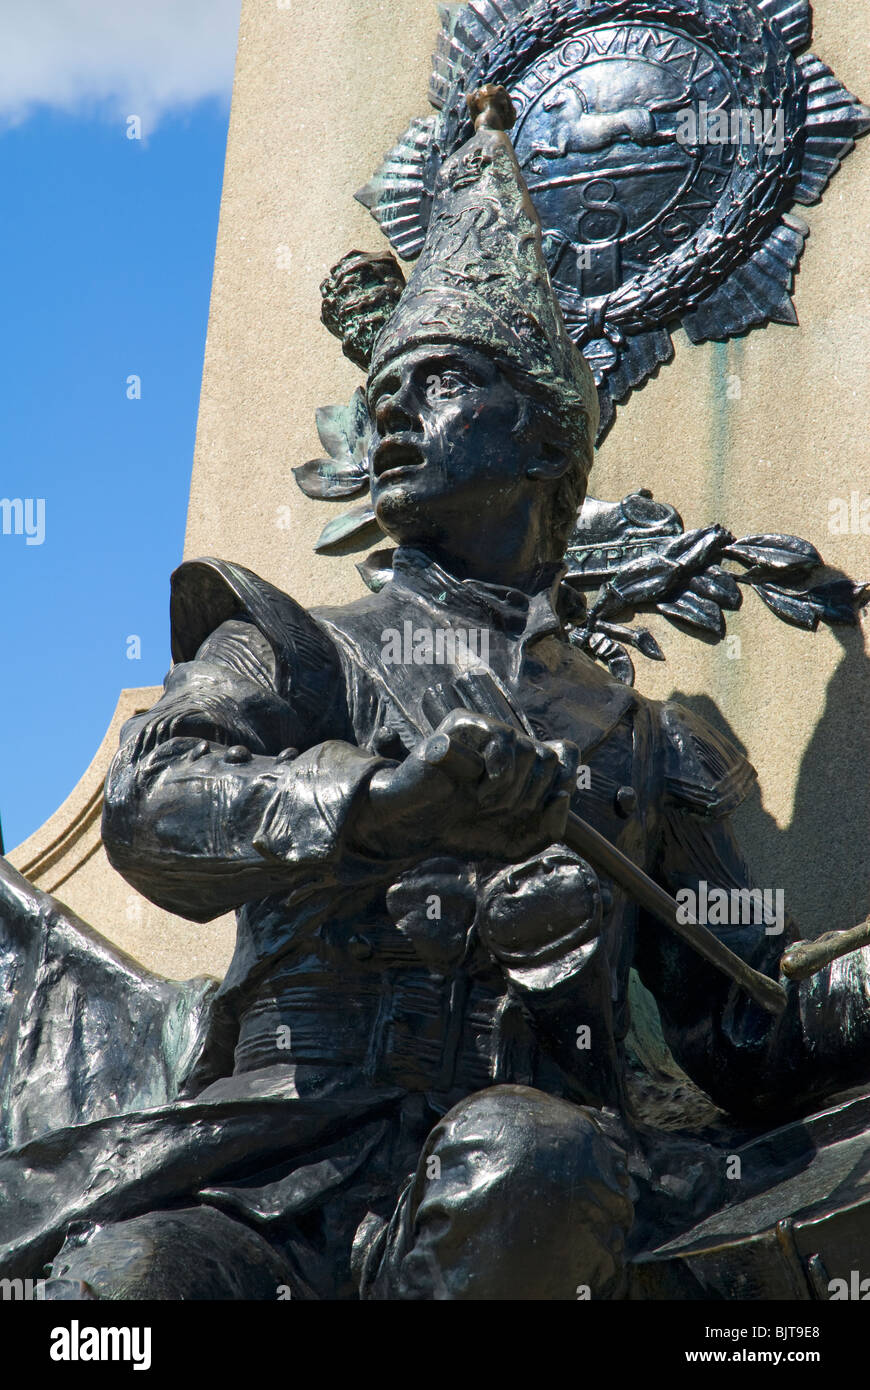 Statue of the drummer boy, part of the memorial to the King's Regiment, Liverpool, England, UK Stock Photo